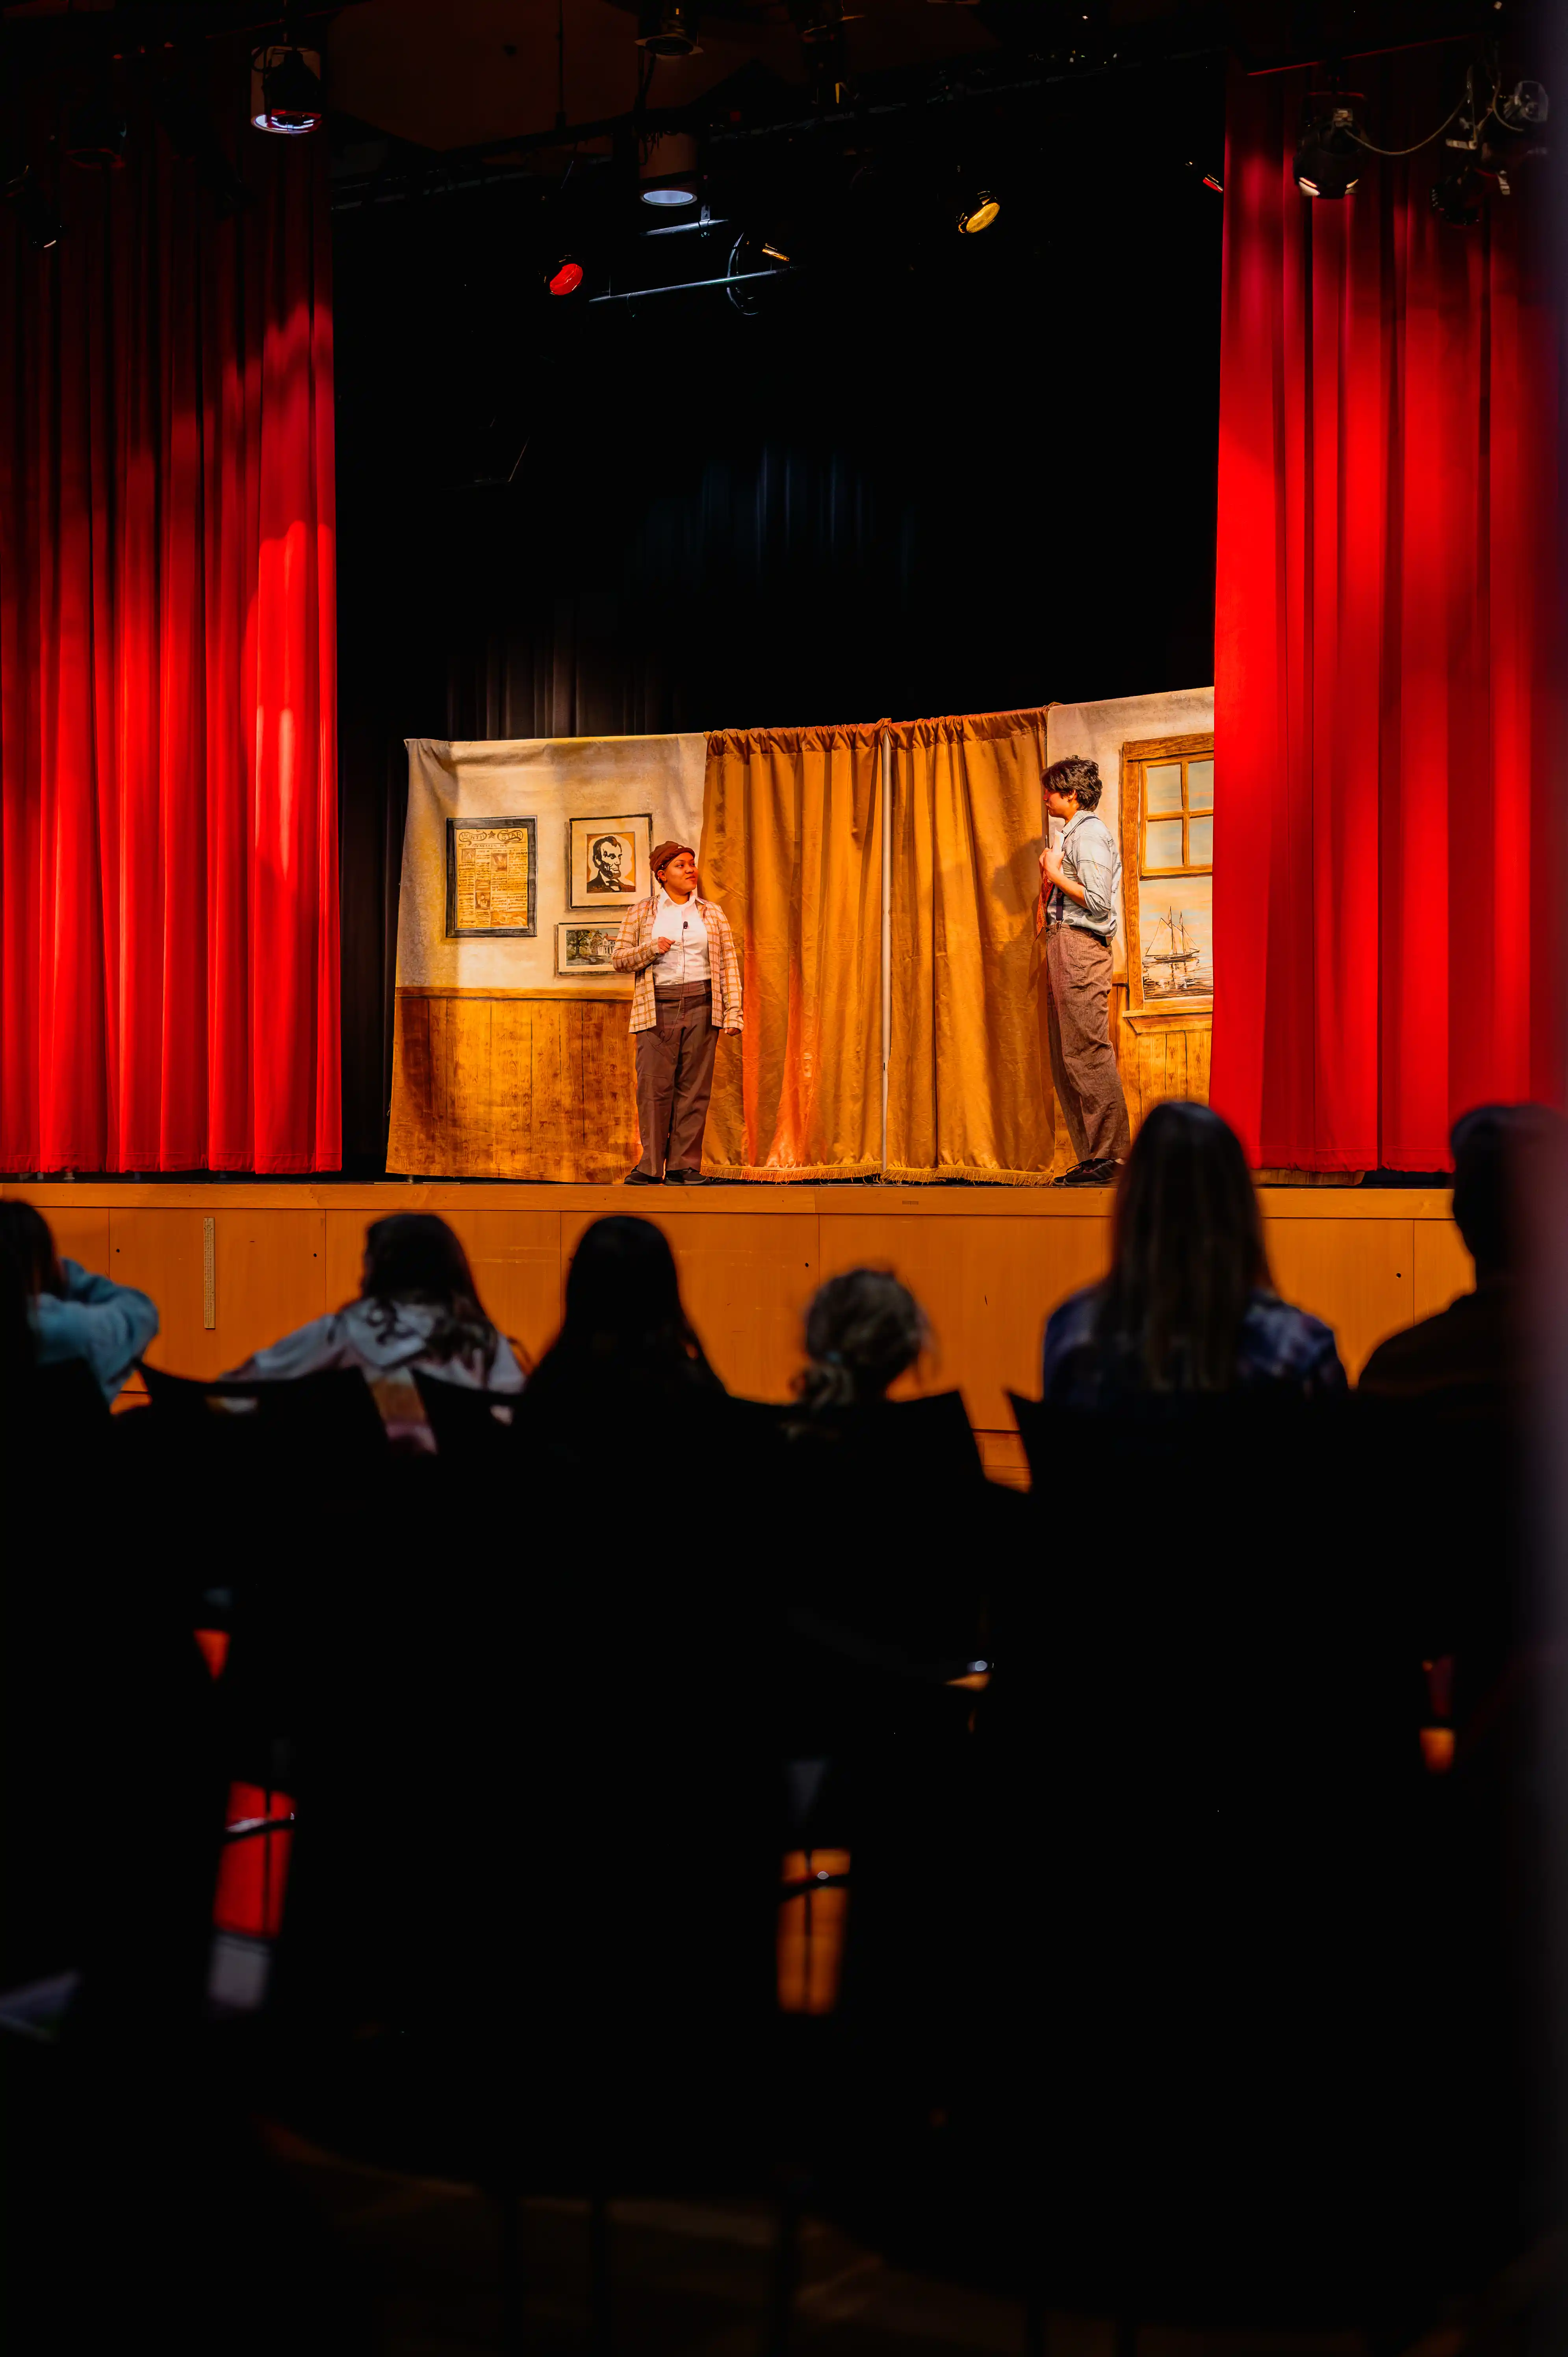 Audience watching a live theater performance with actors on stage behind red curtains.